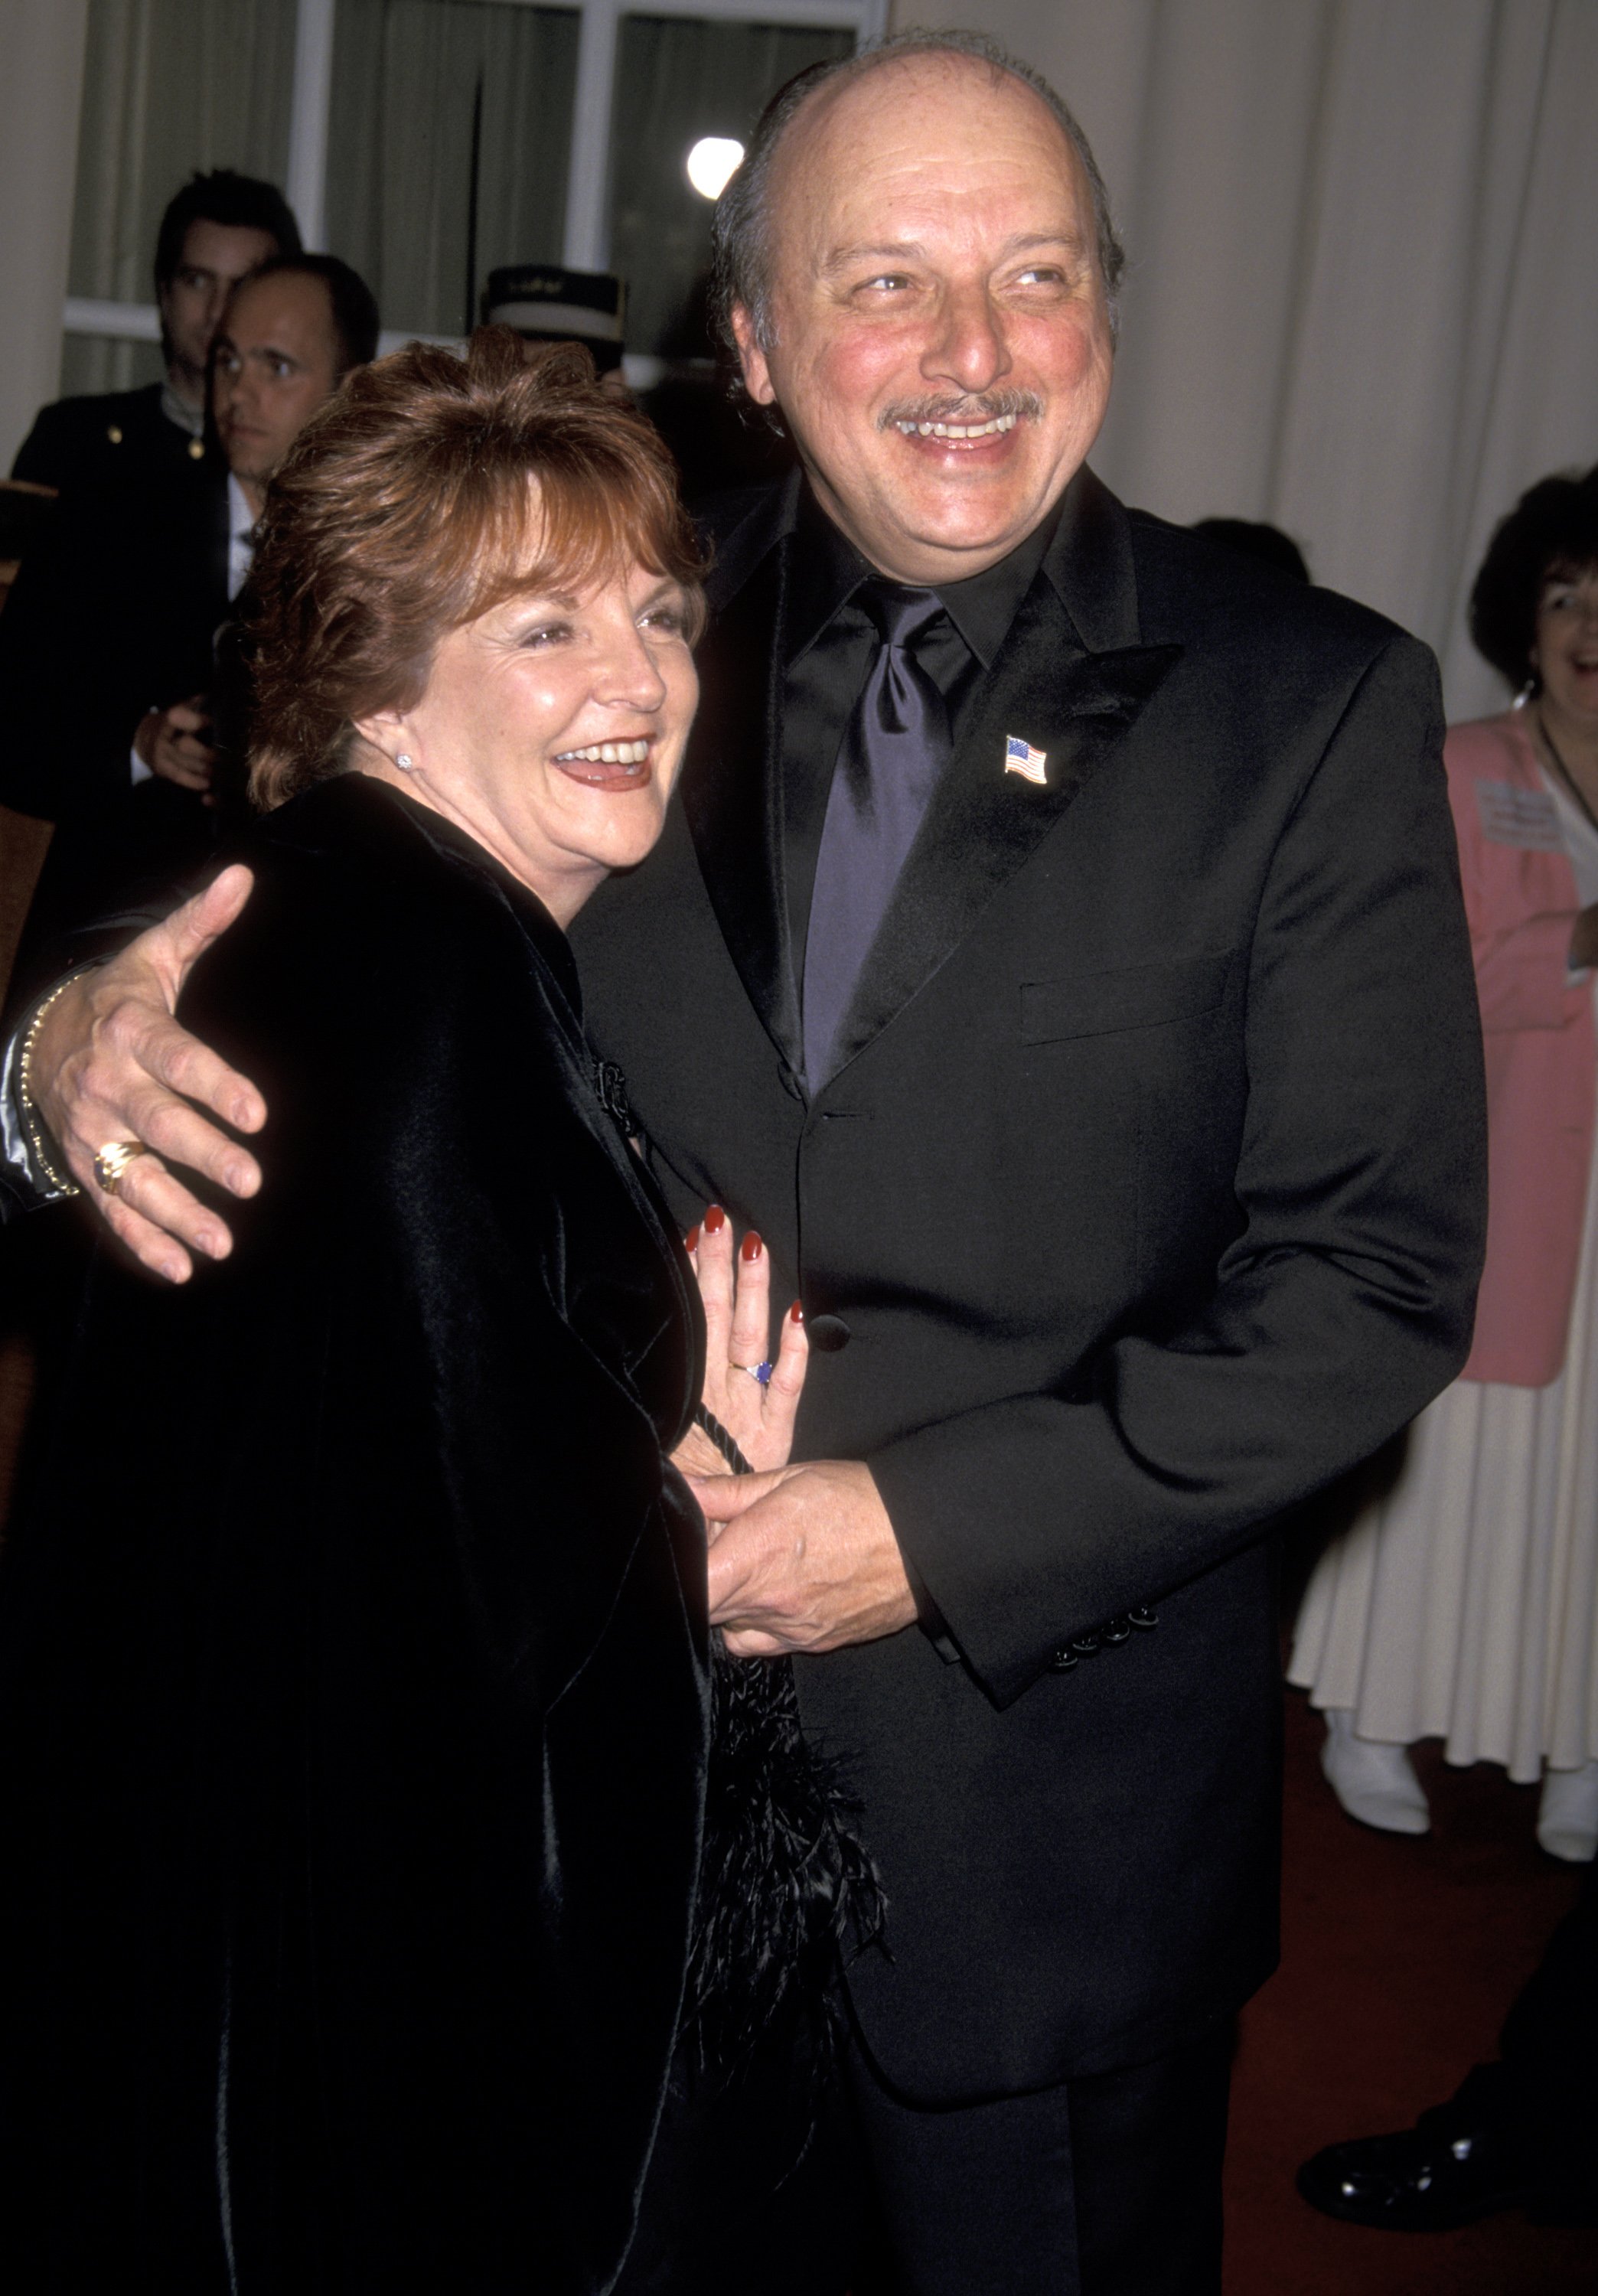 Dennis Franz and Joanie Zeck during 2002 AFI Awards Ceremony at Beverly Hills Hotel in Beverly Hills, California. / Source: Getty Images